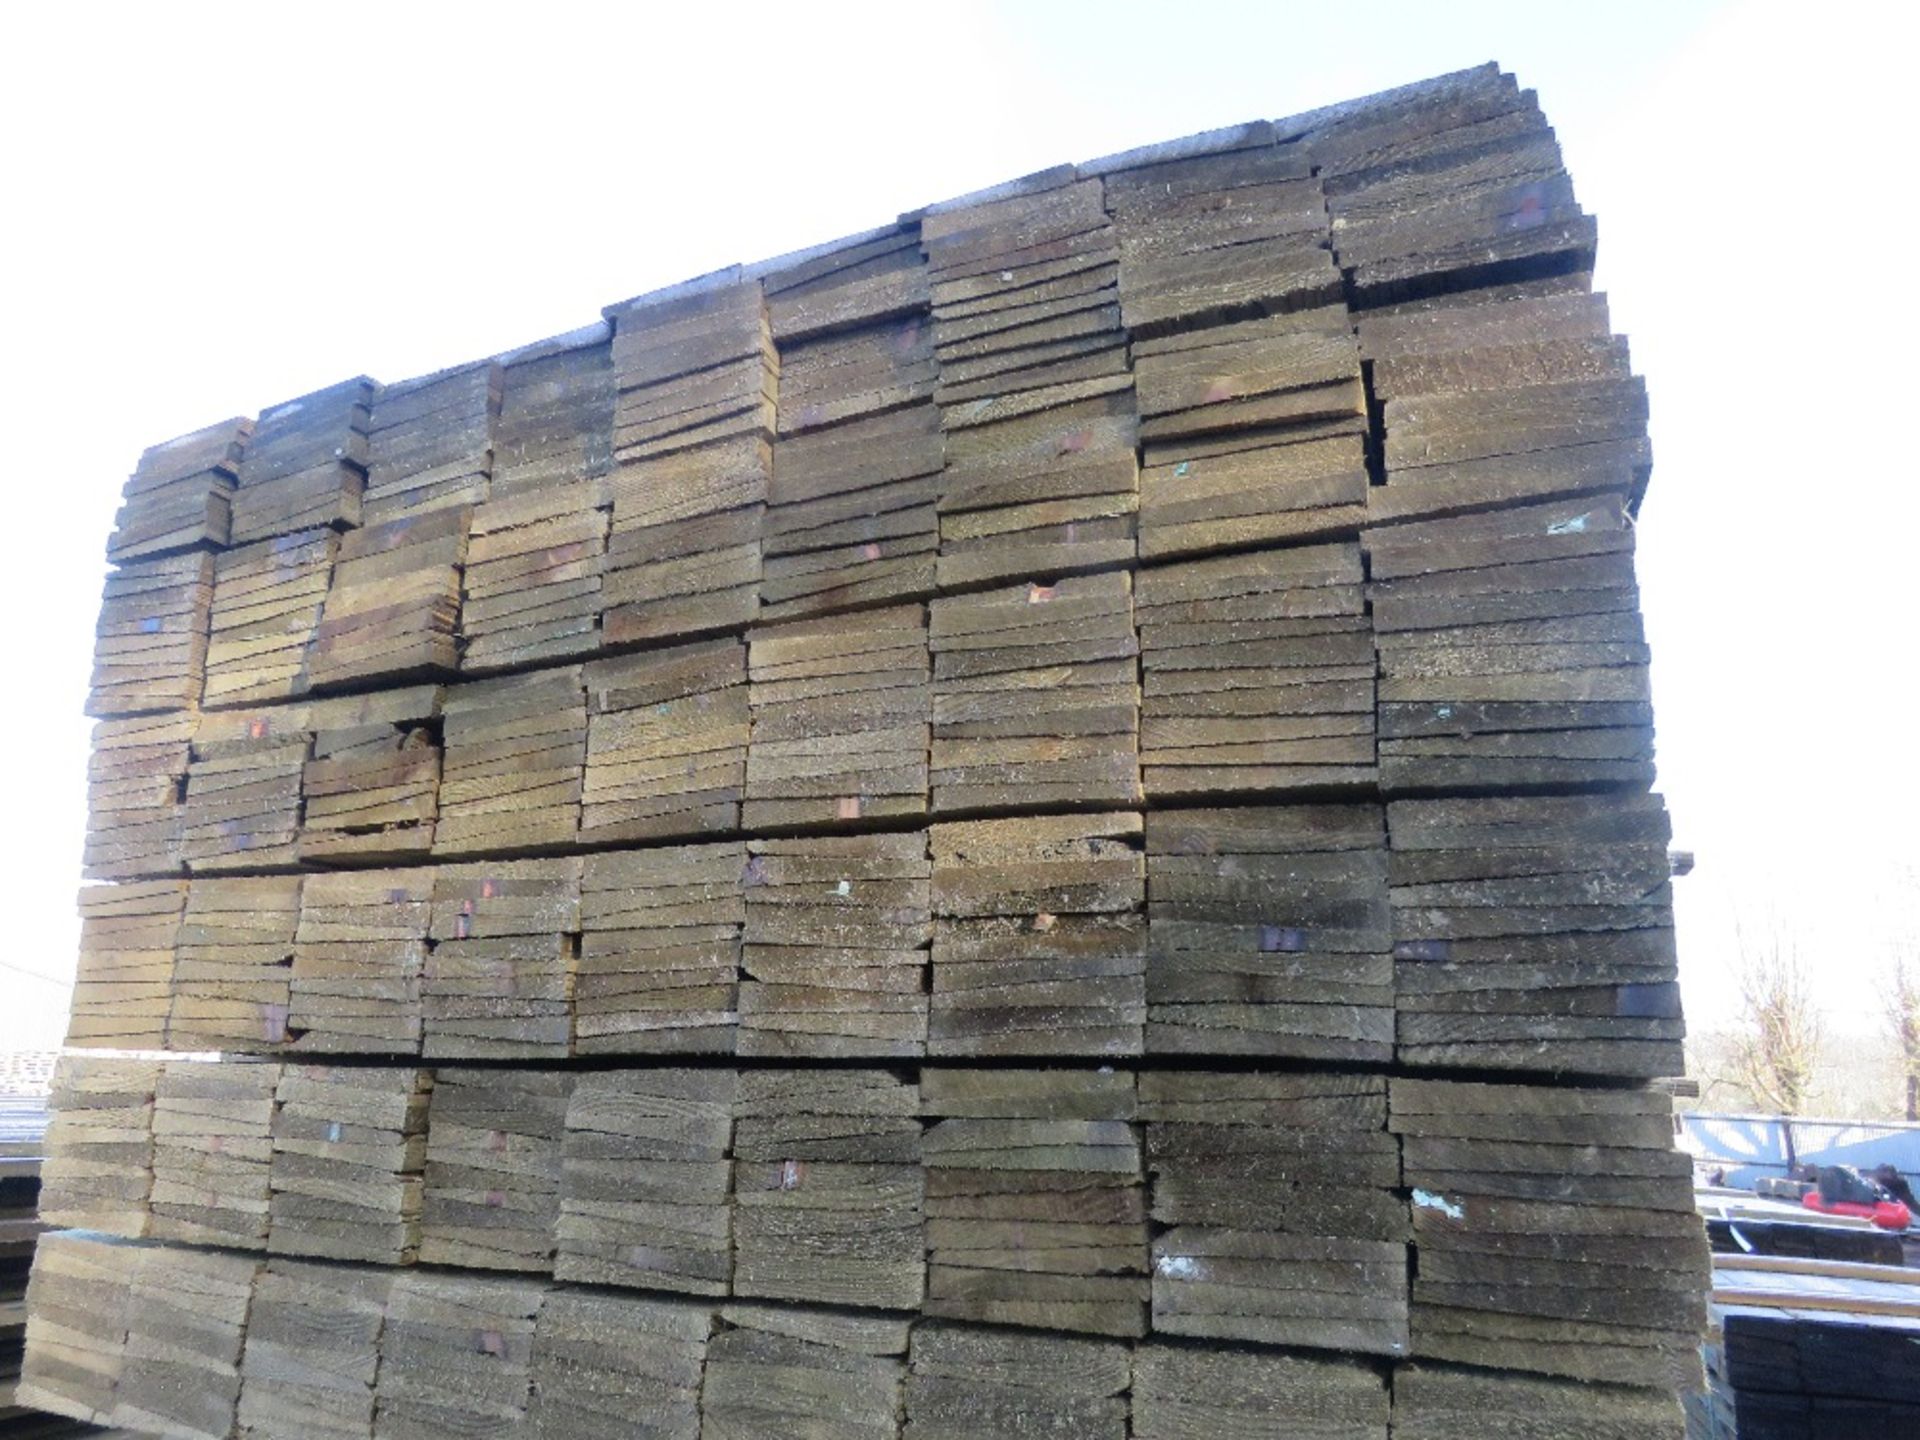 LARGE BUNDLE OF PRESSURE TREATED FEATHER EDGE TIMBER CLADDING: 1.2M LENGTH X 10CM WIDTH APPROX. - Image 2 of 3